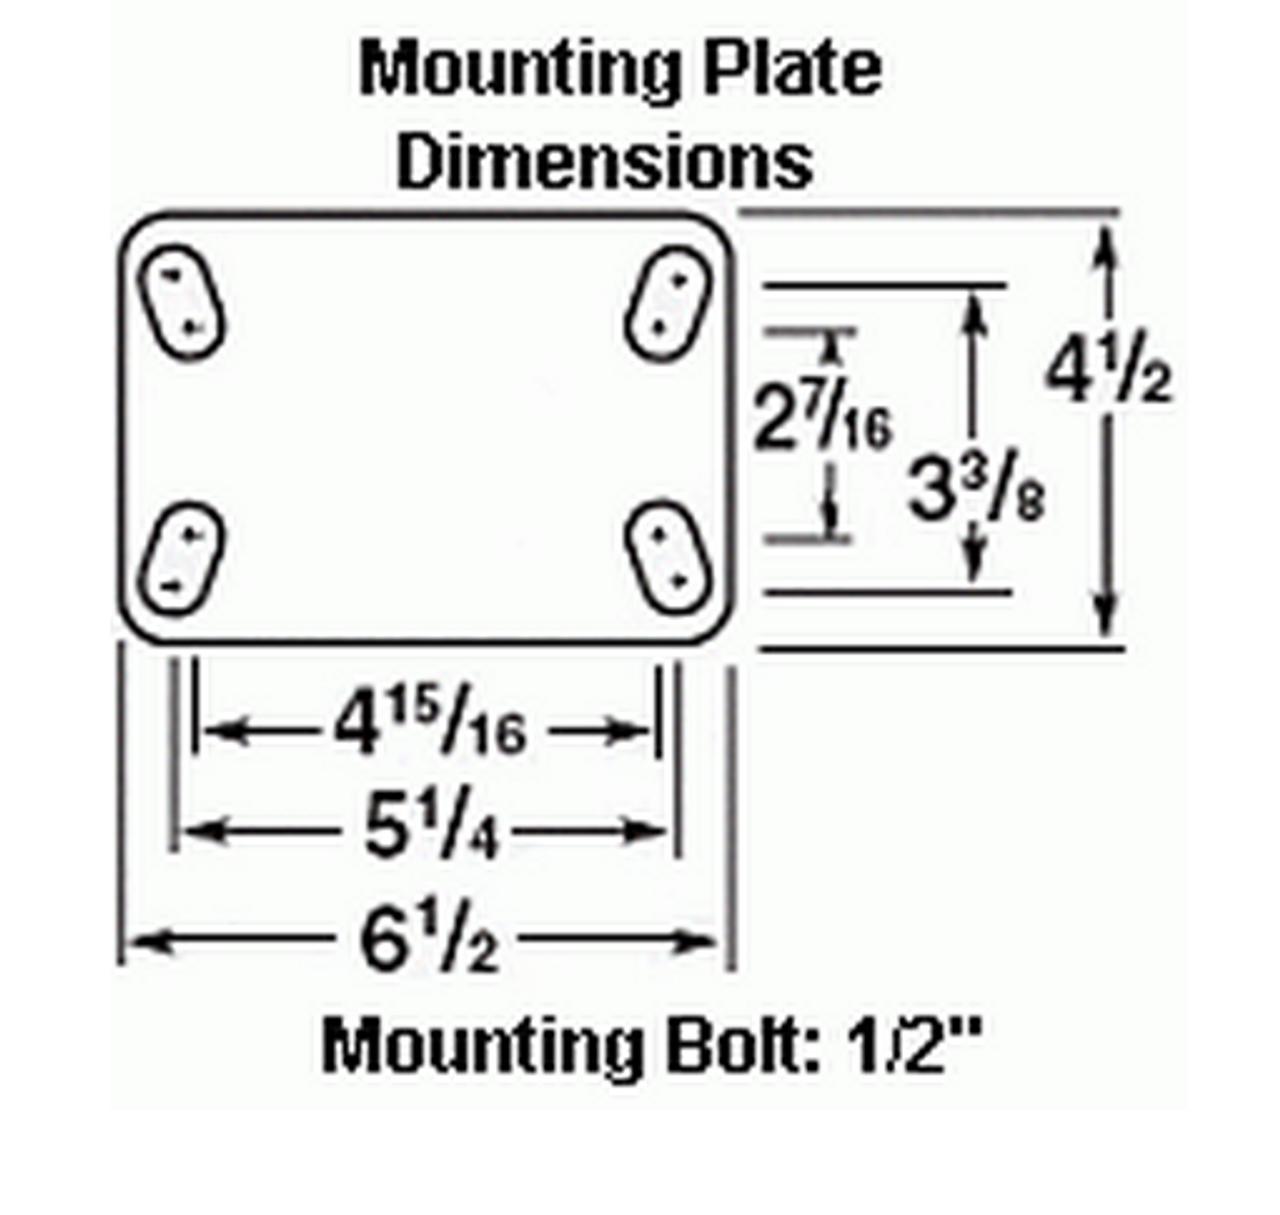 4.5 x 6.5 Plate Dimensions